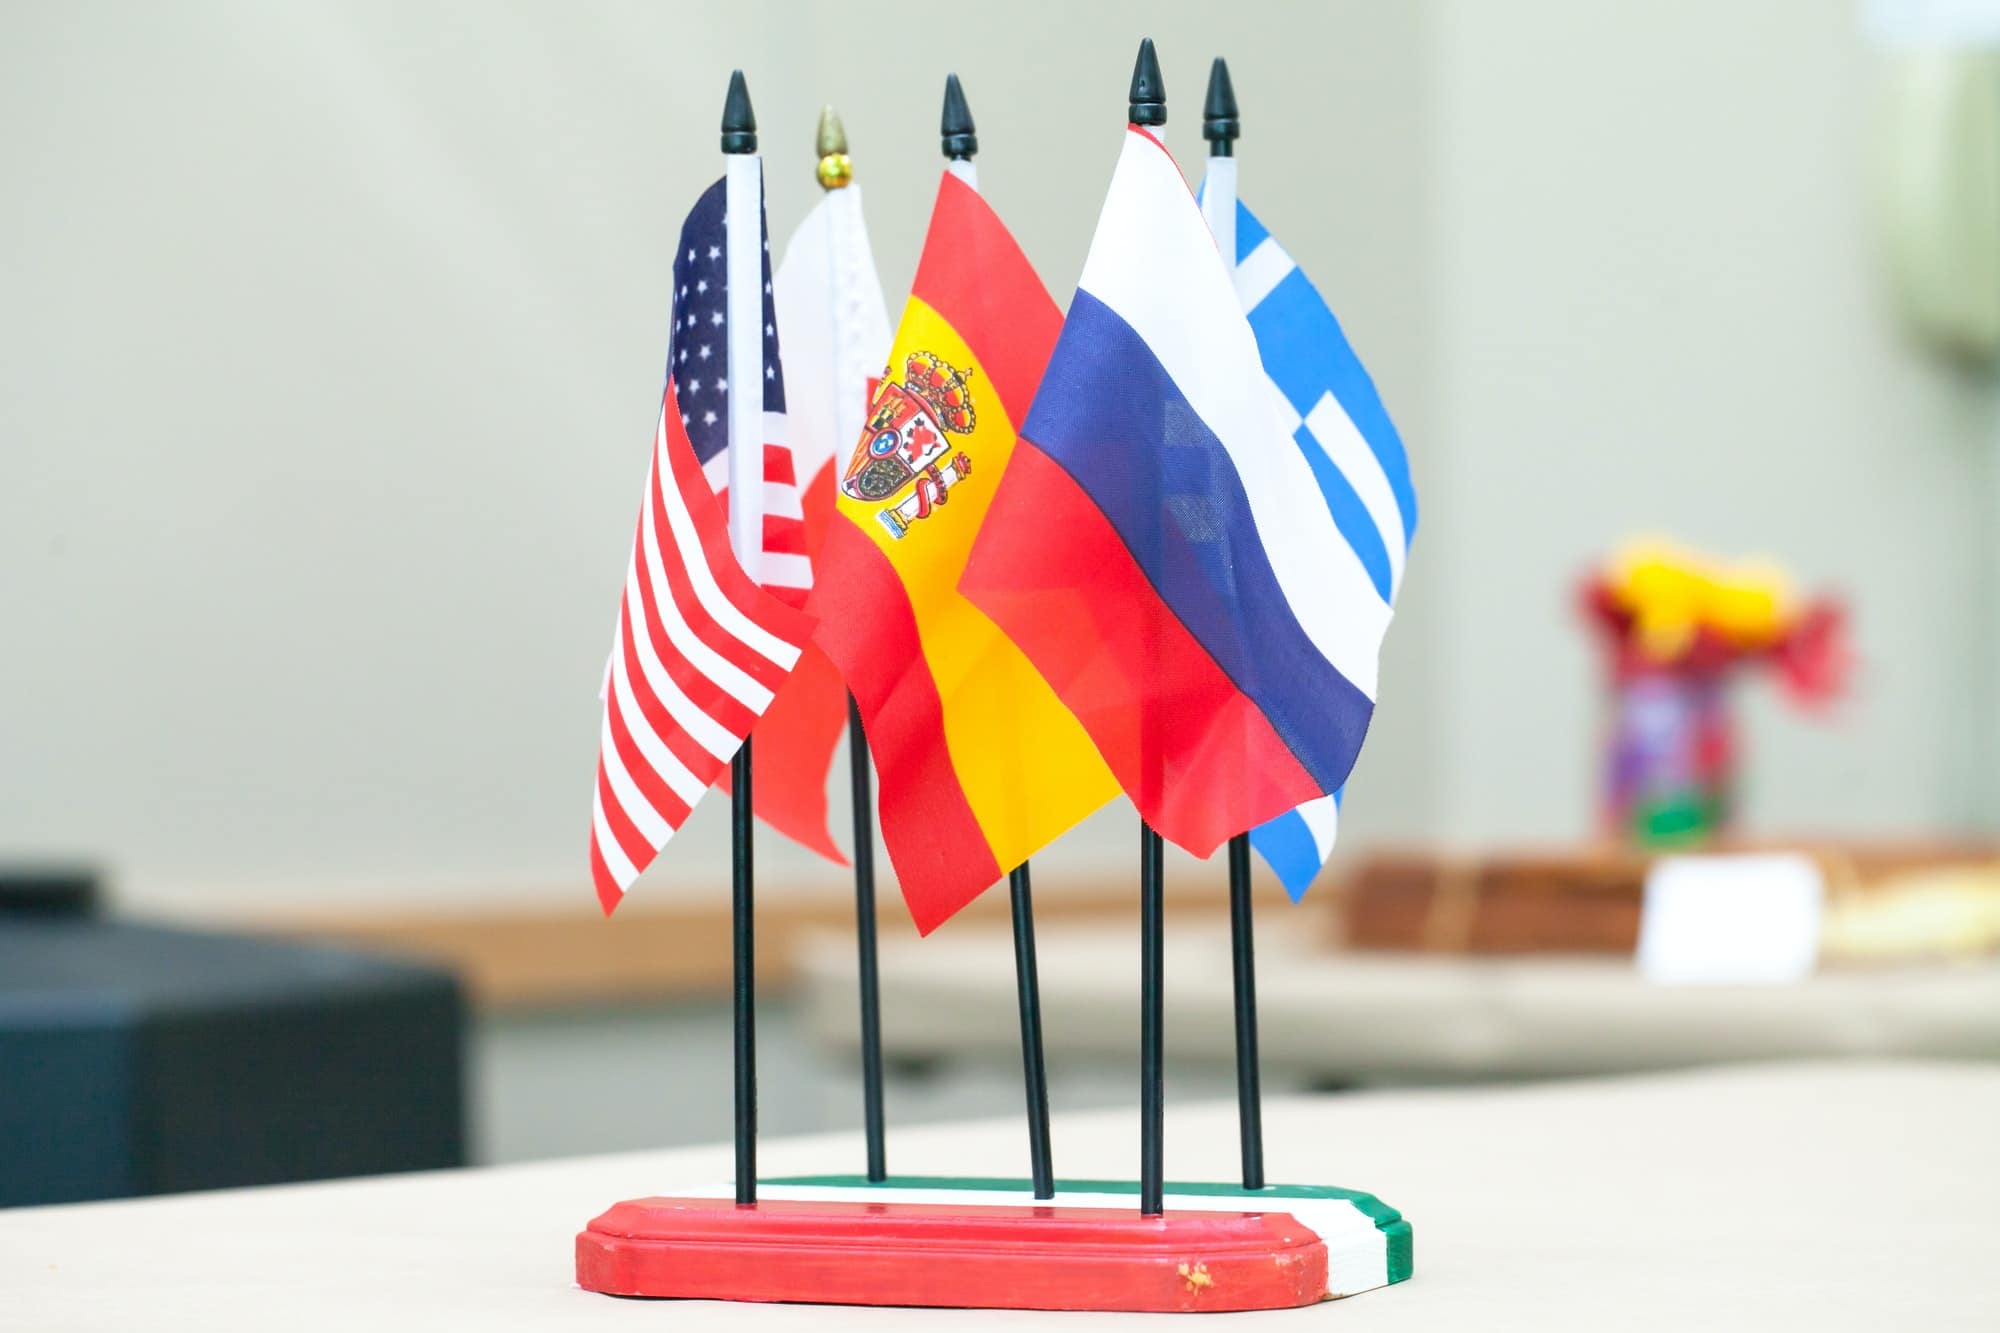 International colored flags . State flags of US, Spanish,Poland,Greece, and the Russia